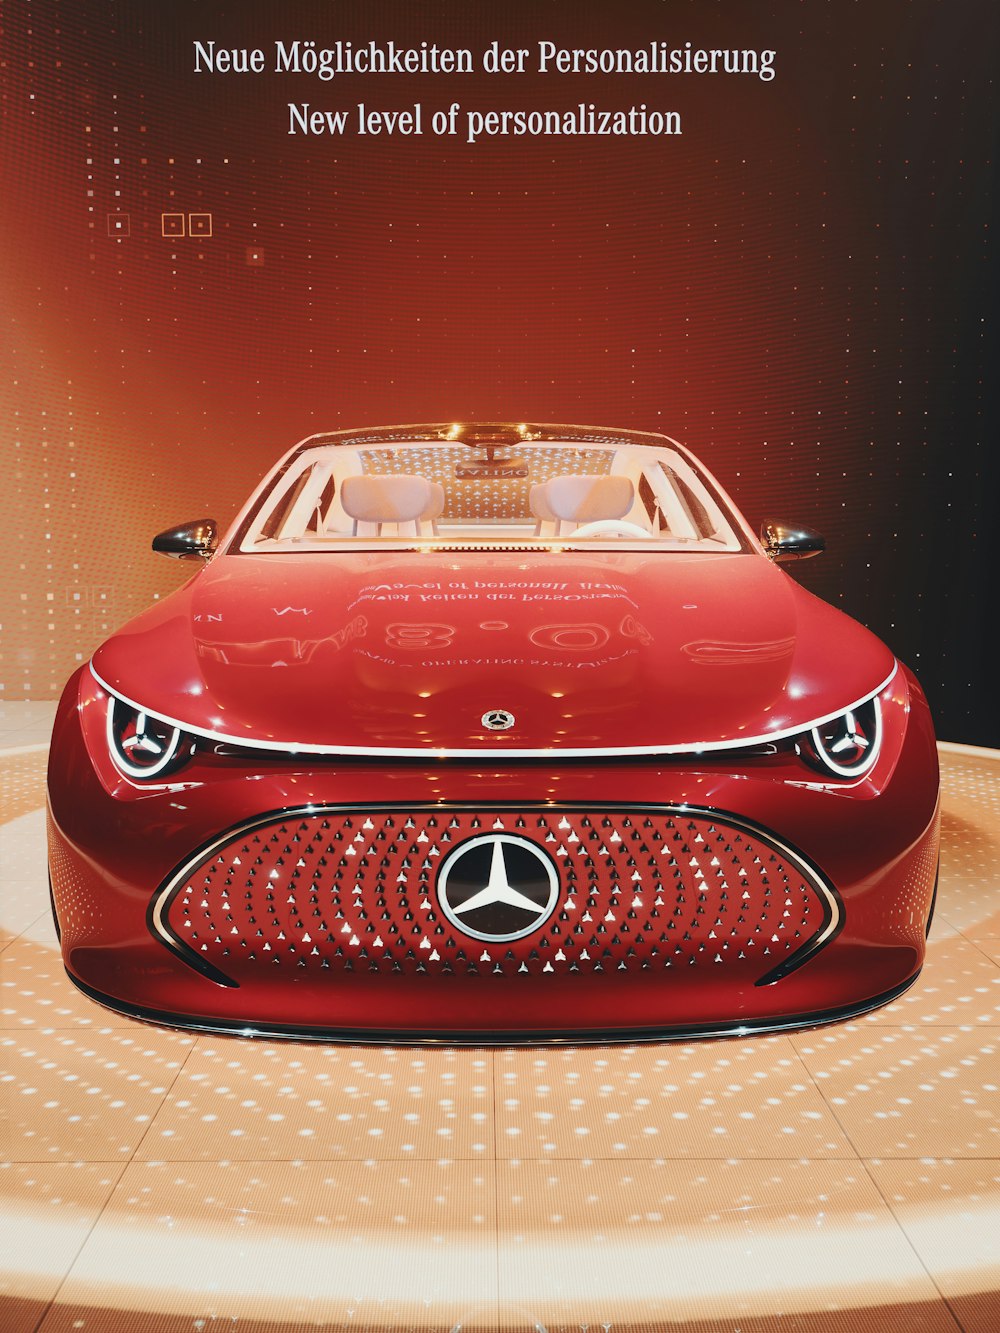 a red mercedes concept car on display at a car show